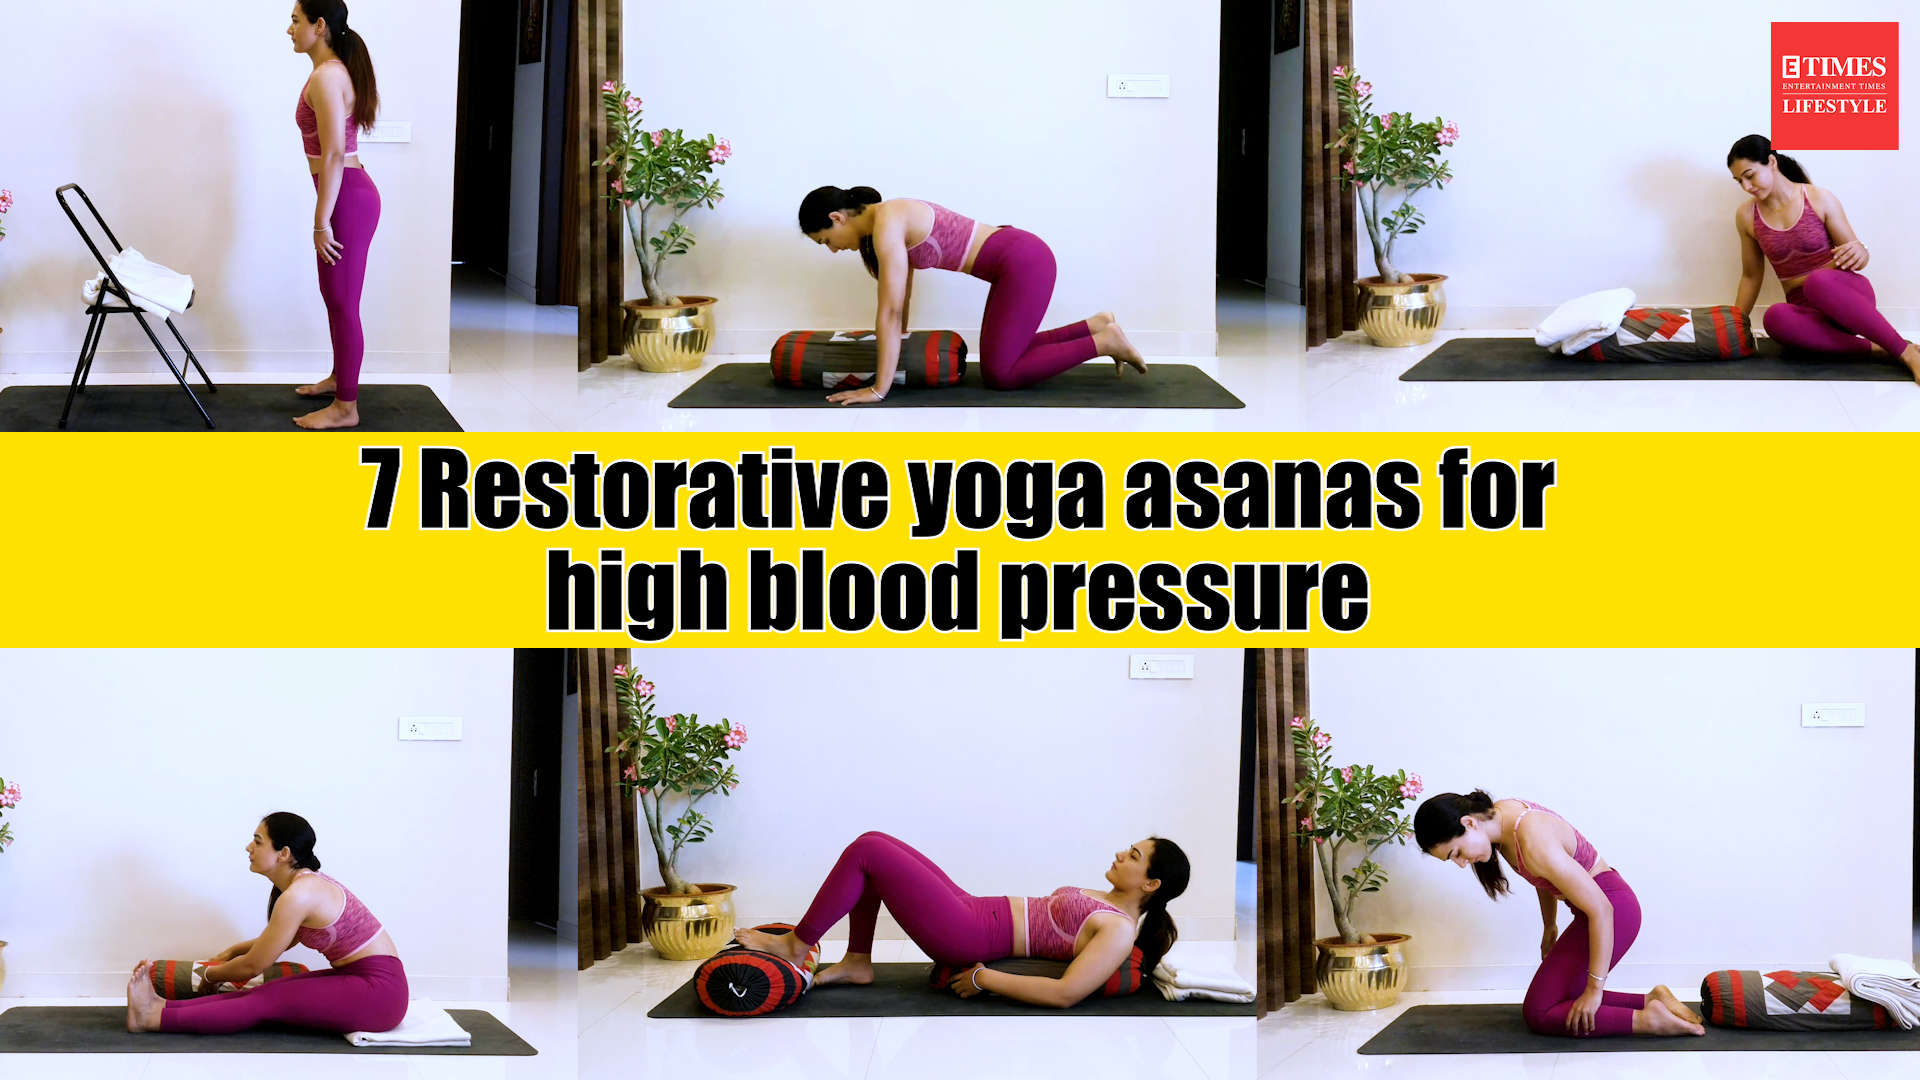 Four easy yoga poses that'll SLASH your blood pressure in 15